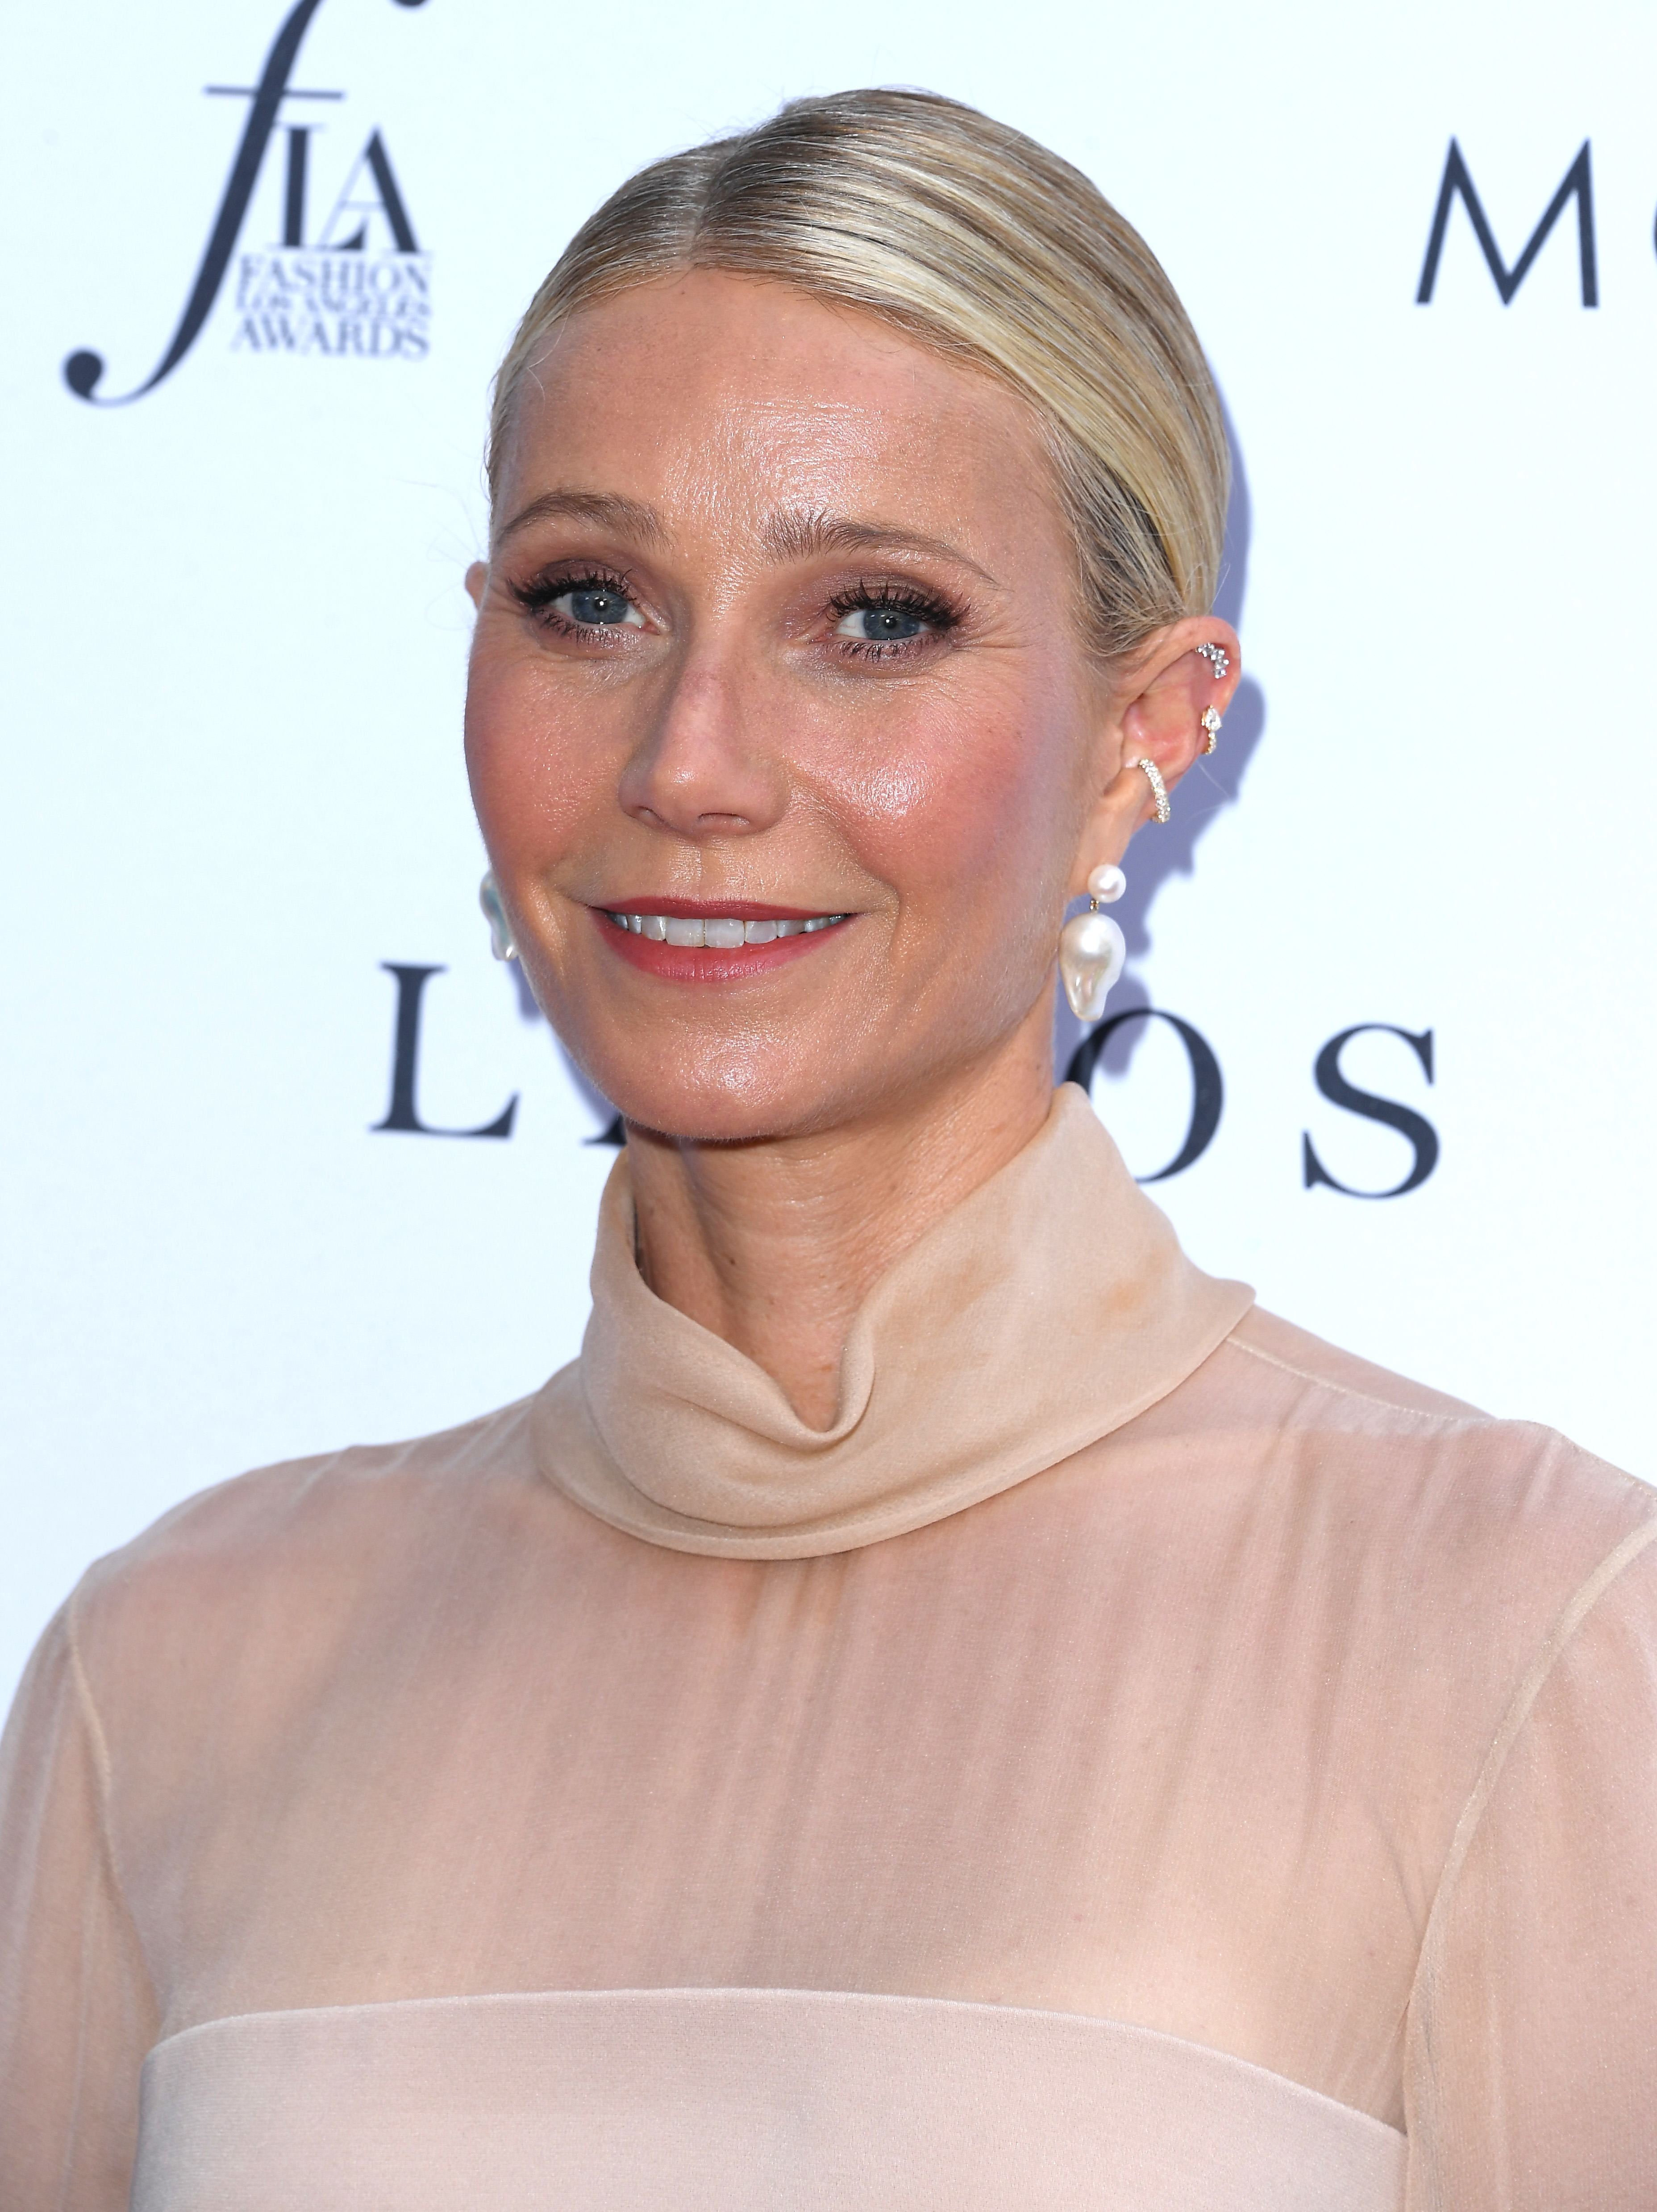 Close-up of Gwyneth smiling at a media event in a diaphanous turtleneck